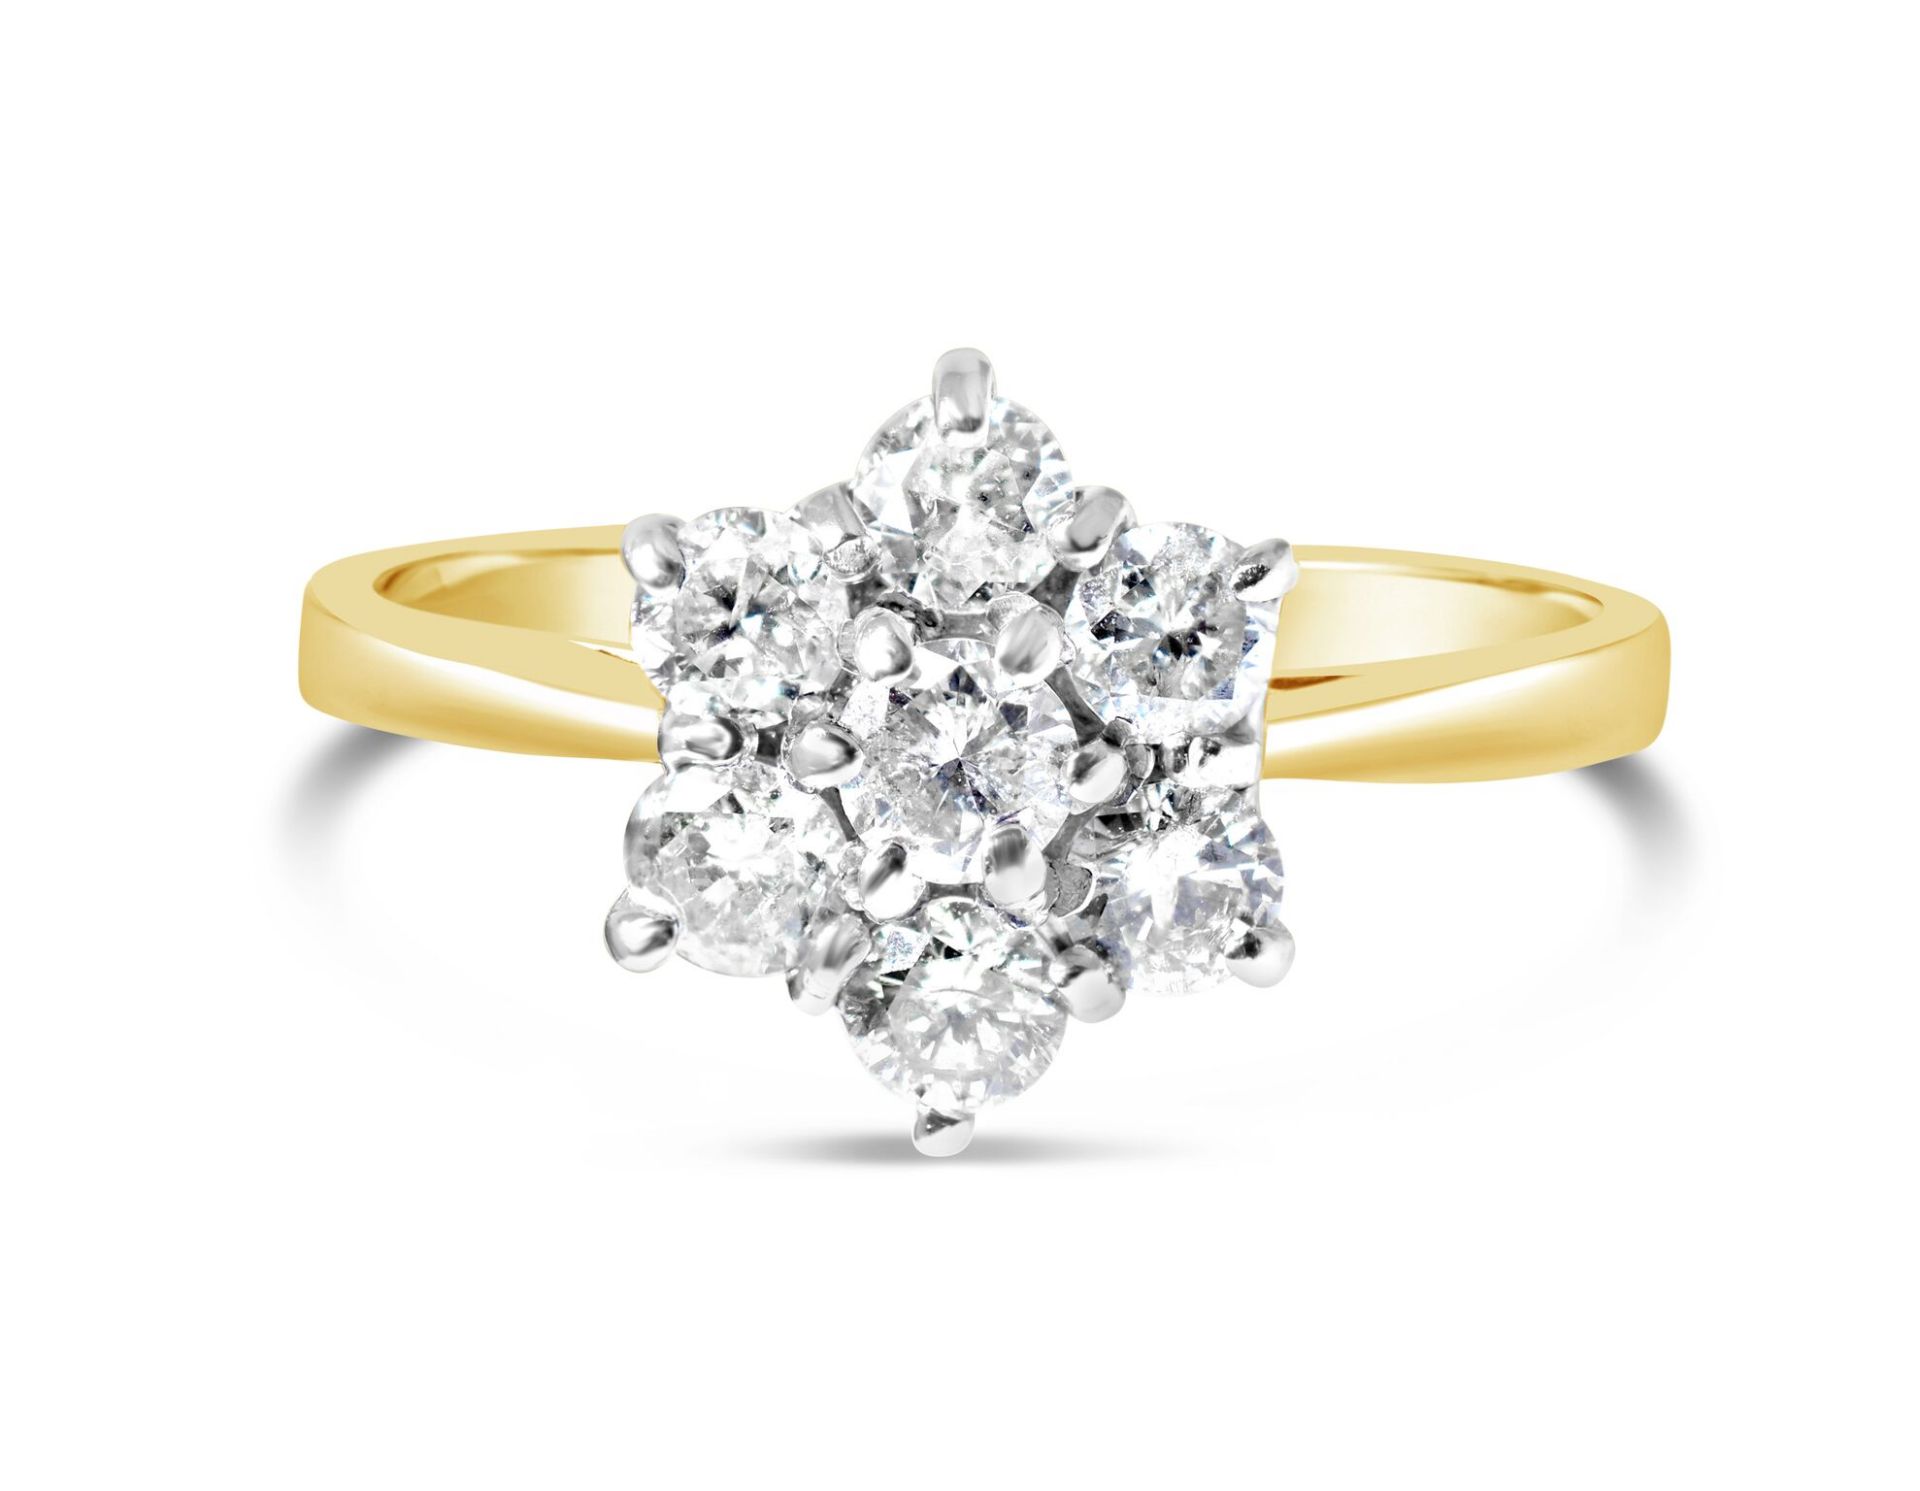 Flower Shaped Diamond 9ct Yellow Gold Ring RRP £1750 Size L